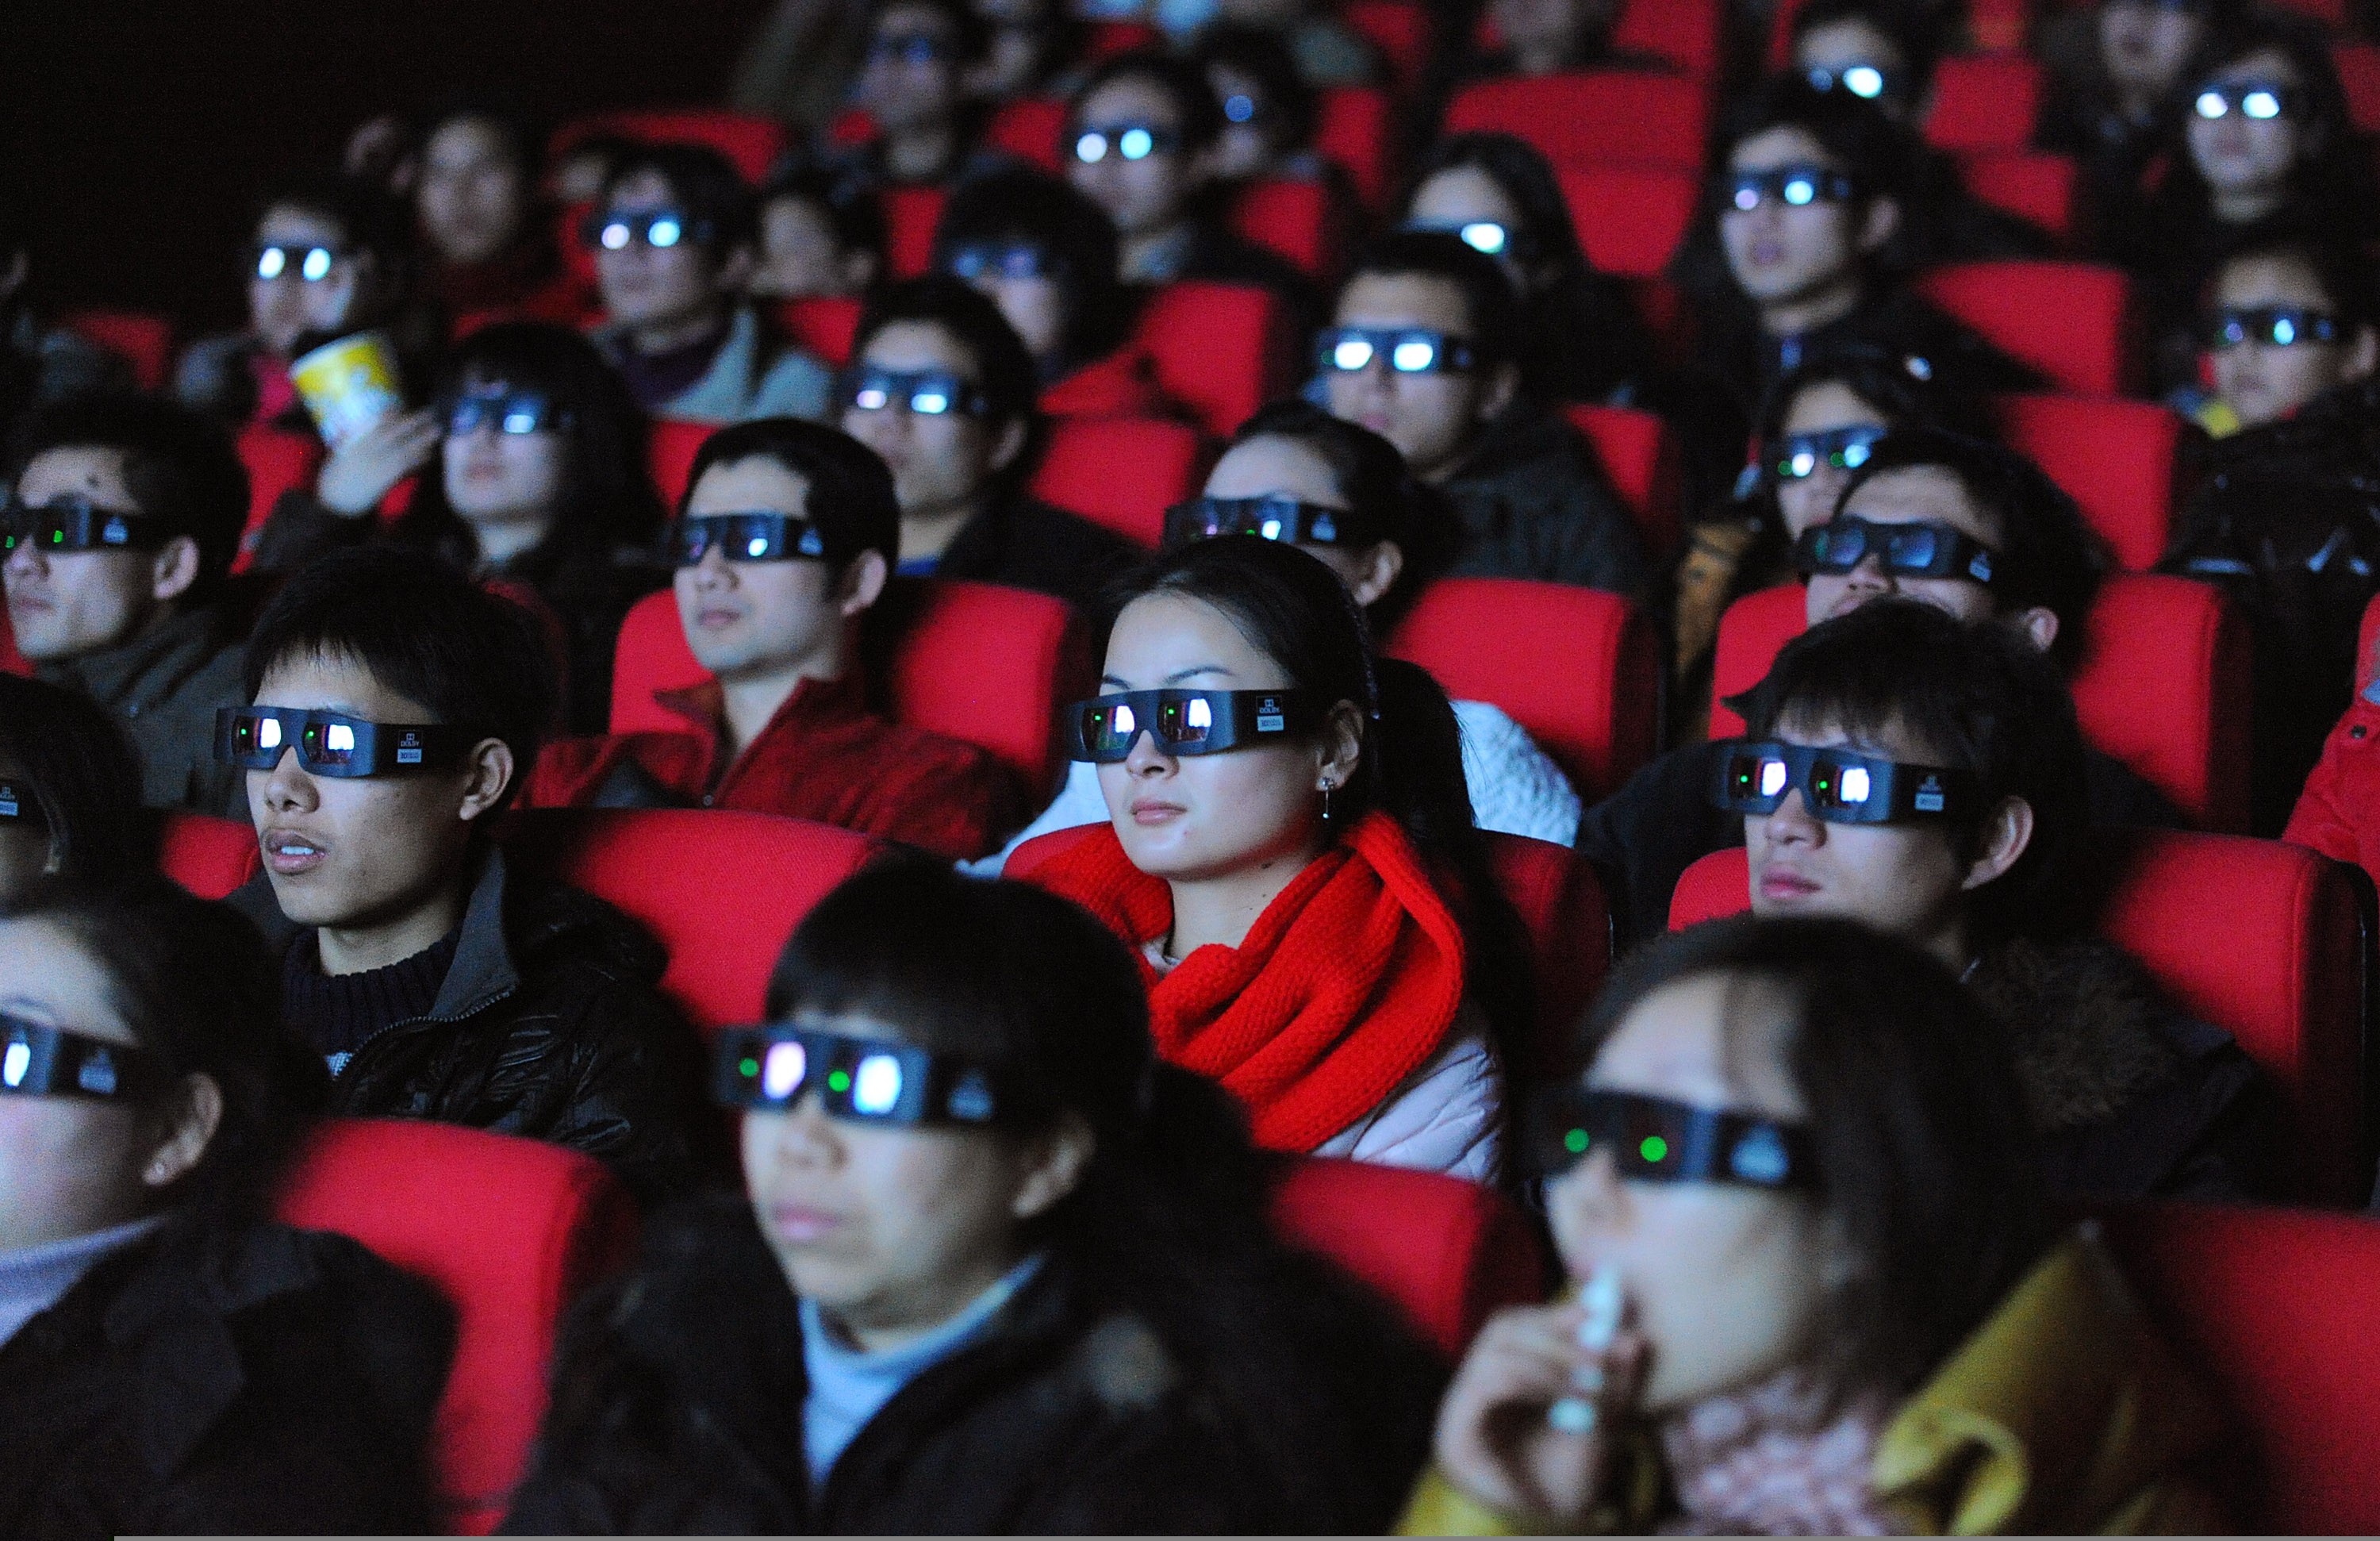 Box office revenue in China touched 32 billion yuan in the first half of 2018. Photo: AFP